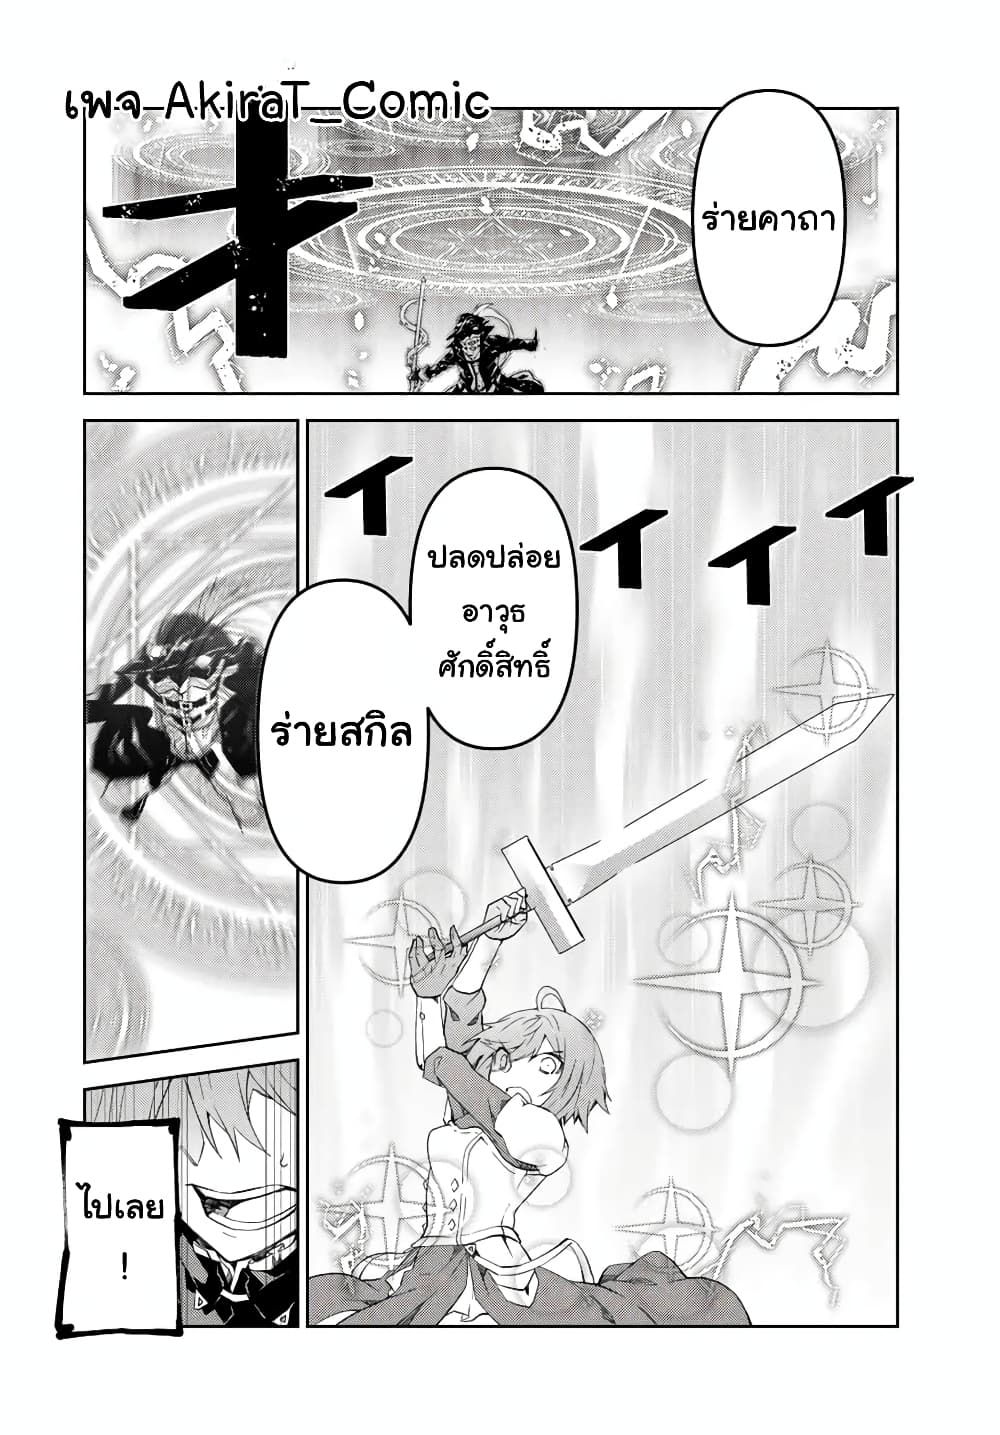 The Weakest Occupation "Blacksmith", but It's Actually the Strongest ช่างตีเหล็กอาชีพกระจอก? 53-53